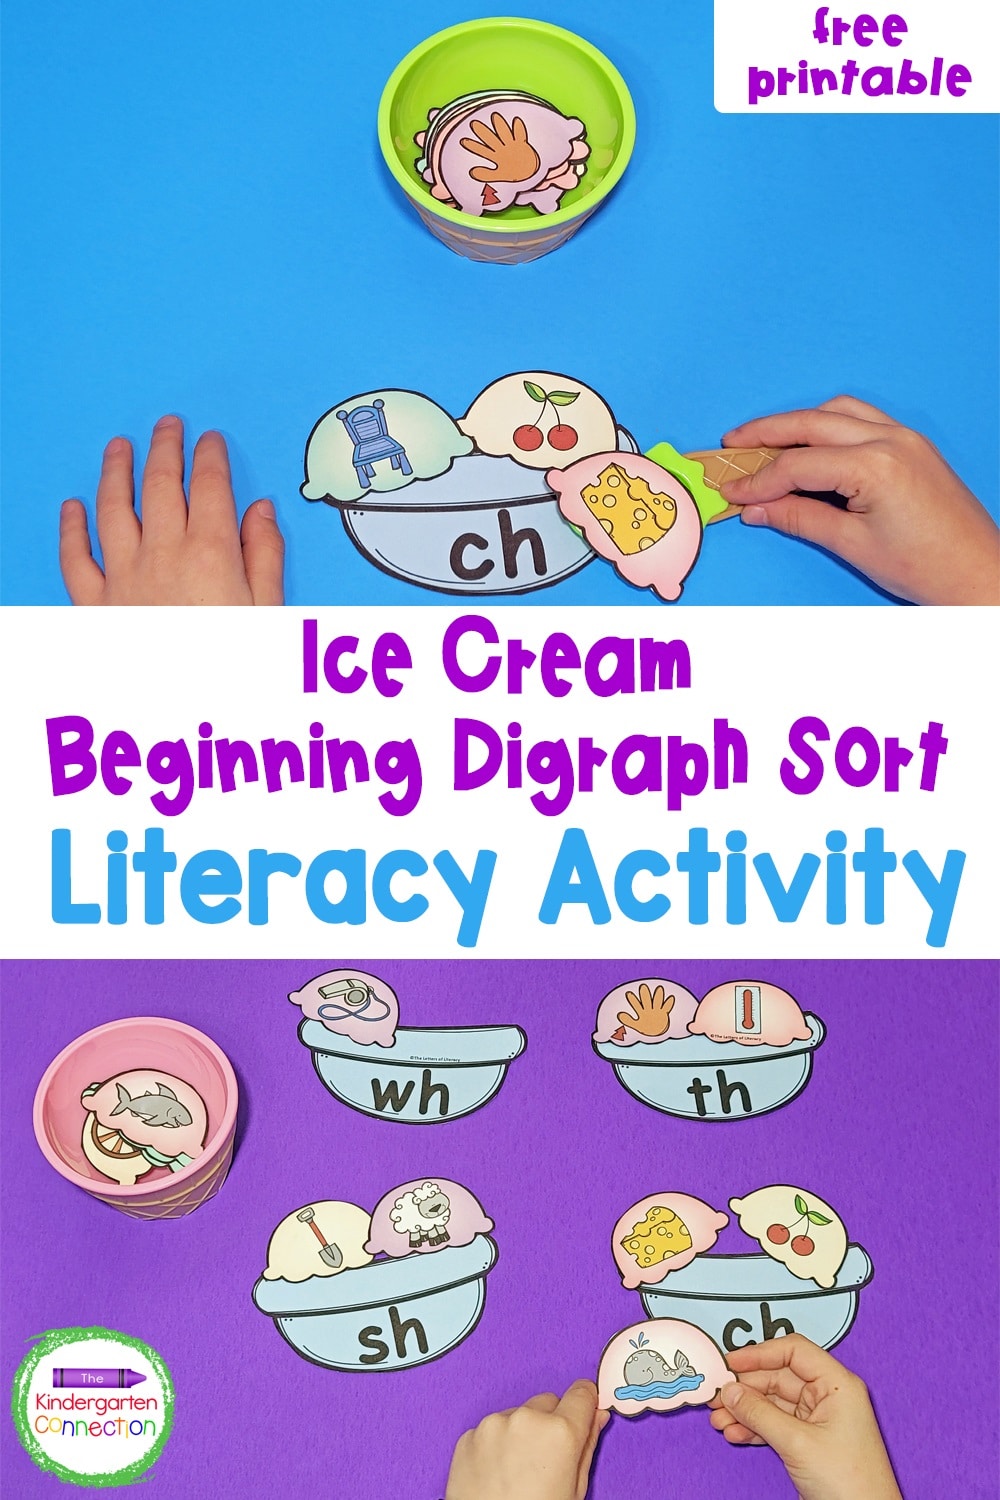 Work on identifying beginning digraph sounds with your early readers with this fun and free Ice Cream Beginning Digraph Sort!